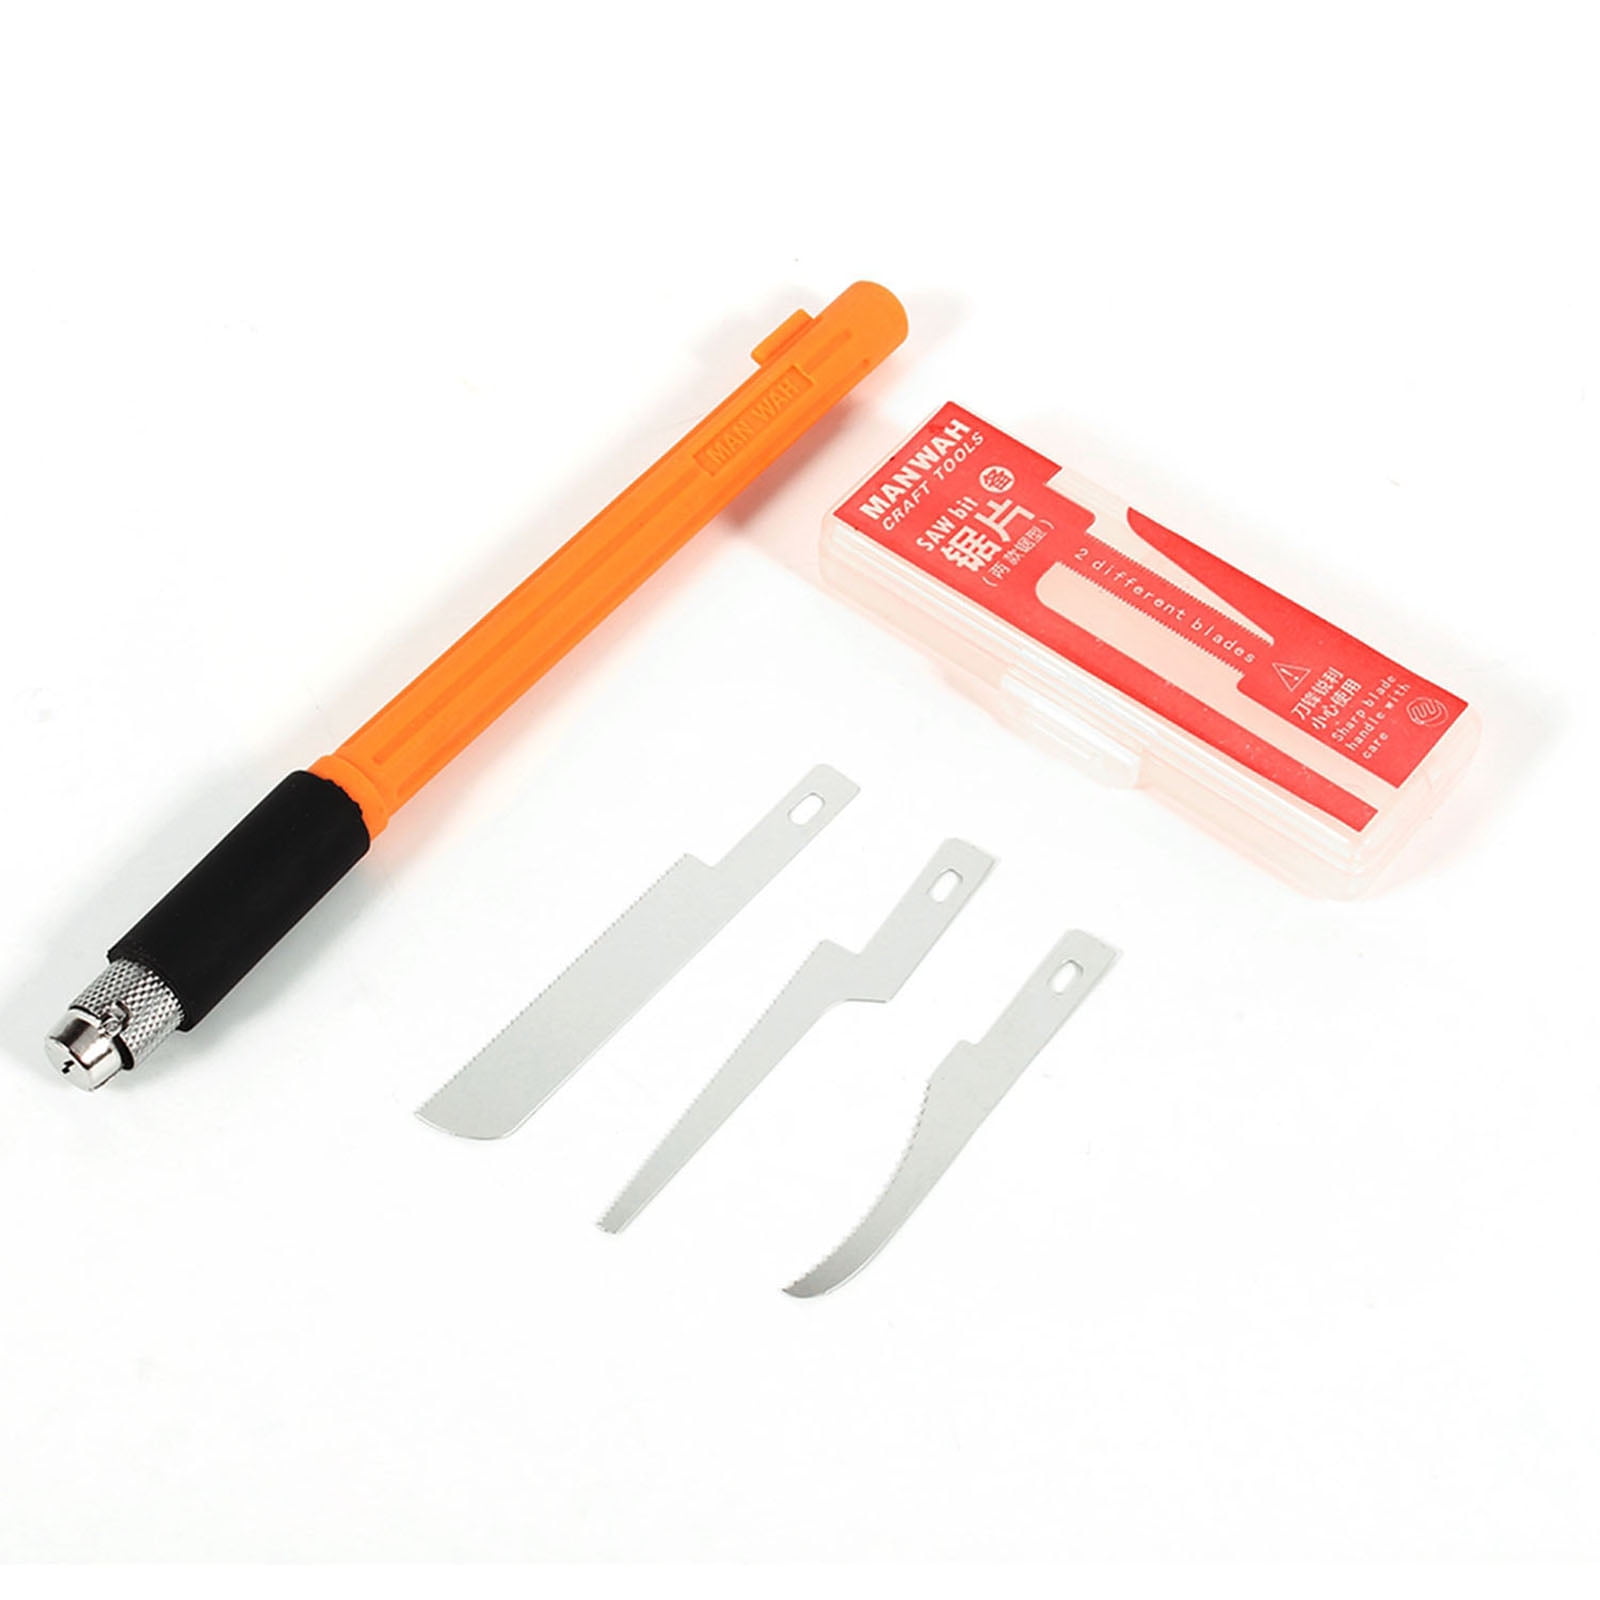 Hand Saw Craft Cutter Handy Engraving Exquisite Hobby Model Tools Wood Cutting 